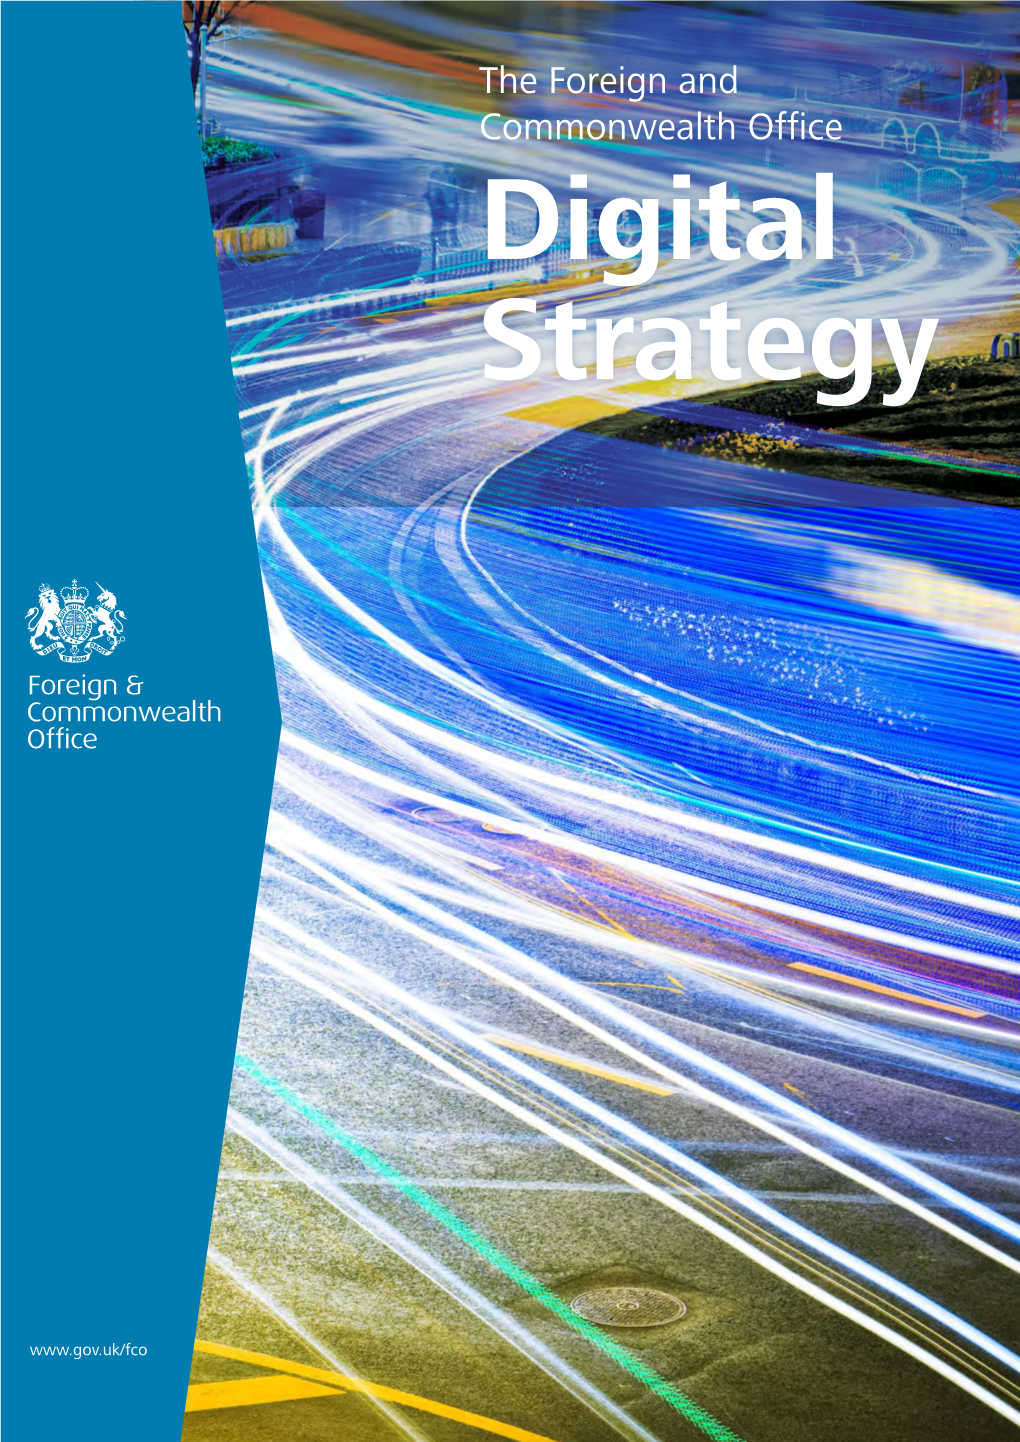 The Foreign and Commonwealth Office Digital Strategy